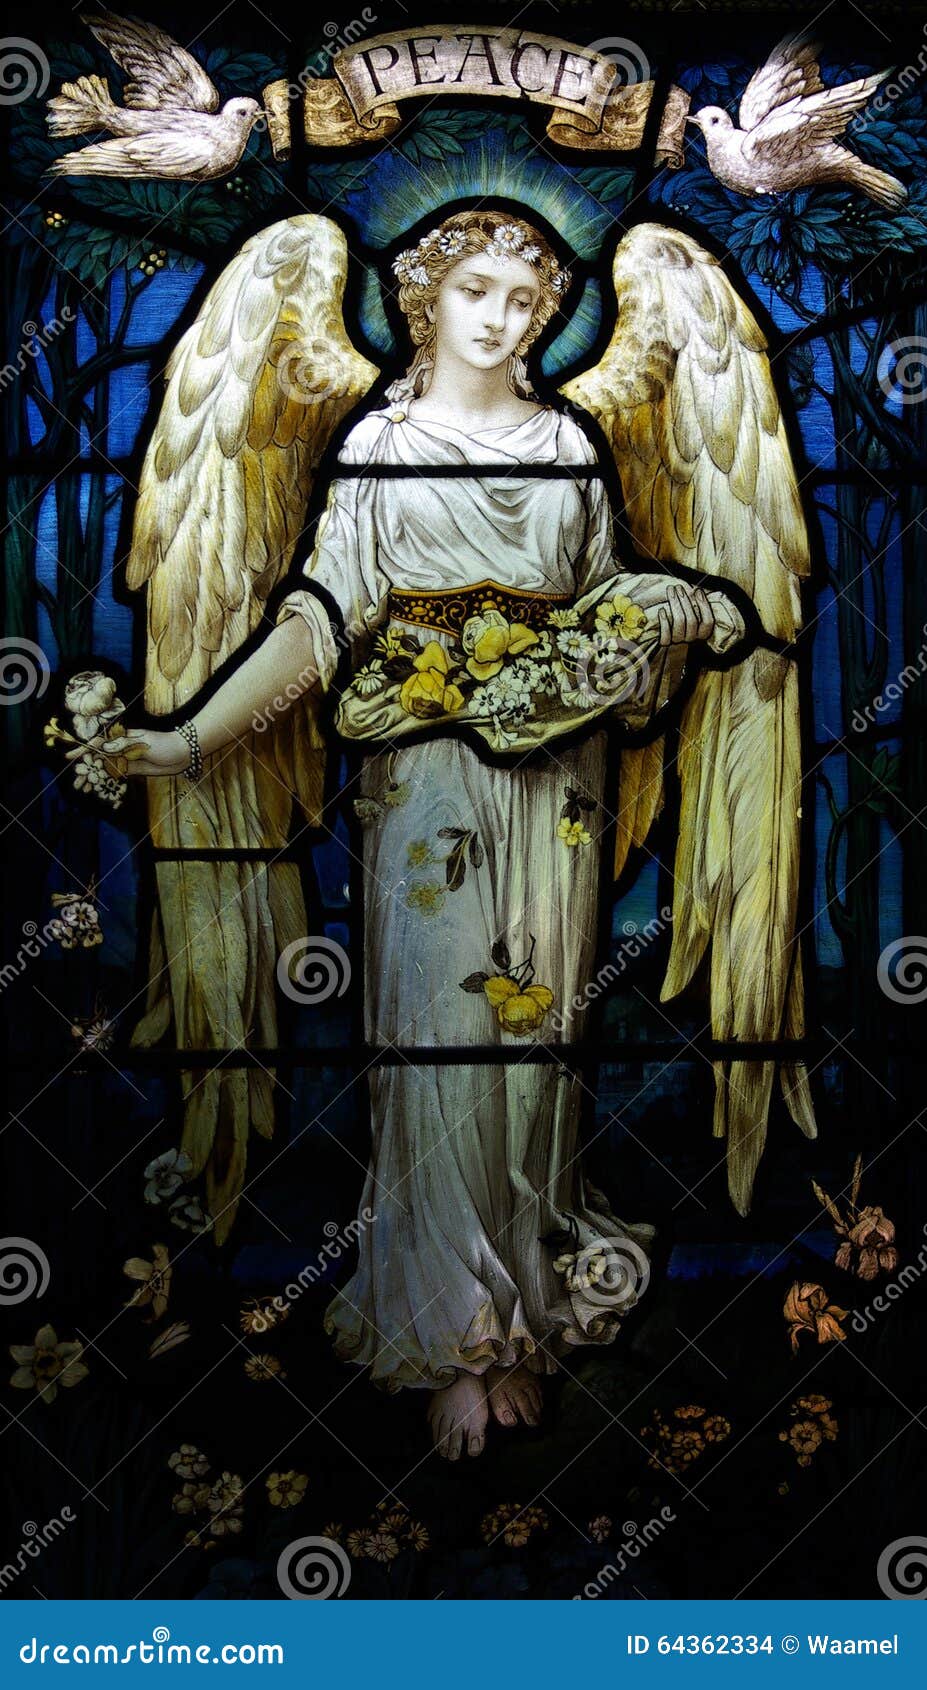 angel with doves and peace